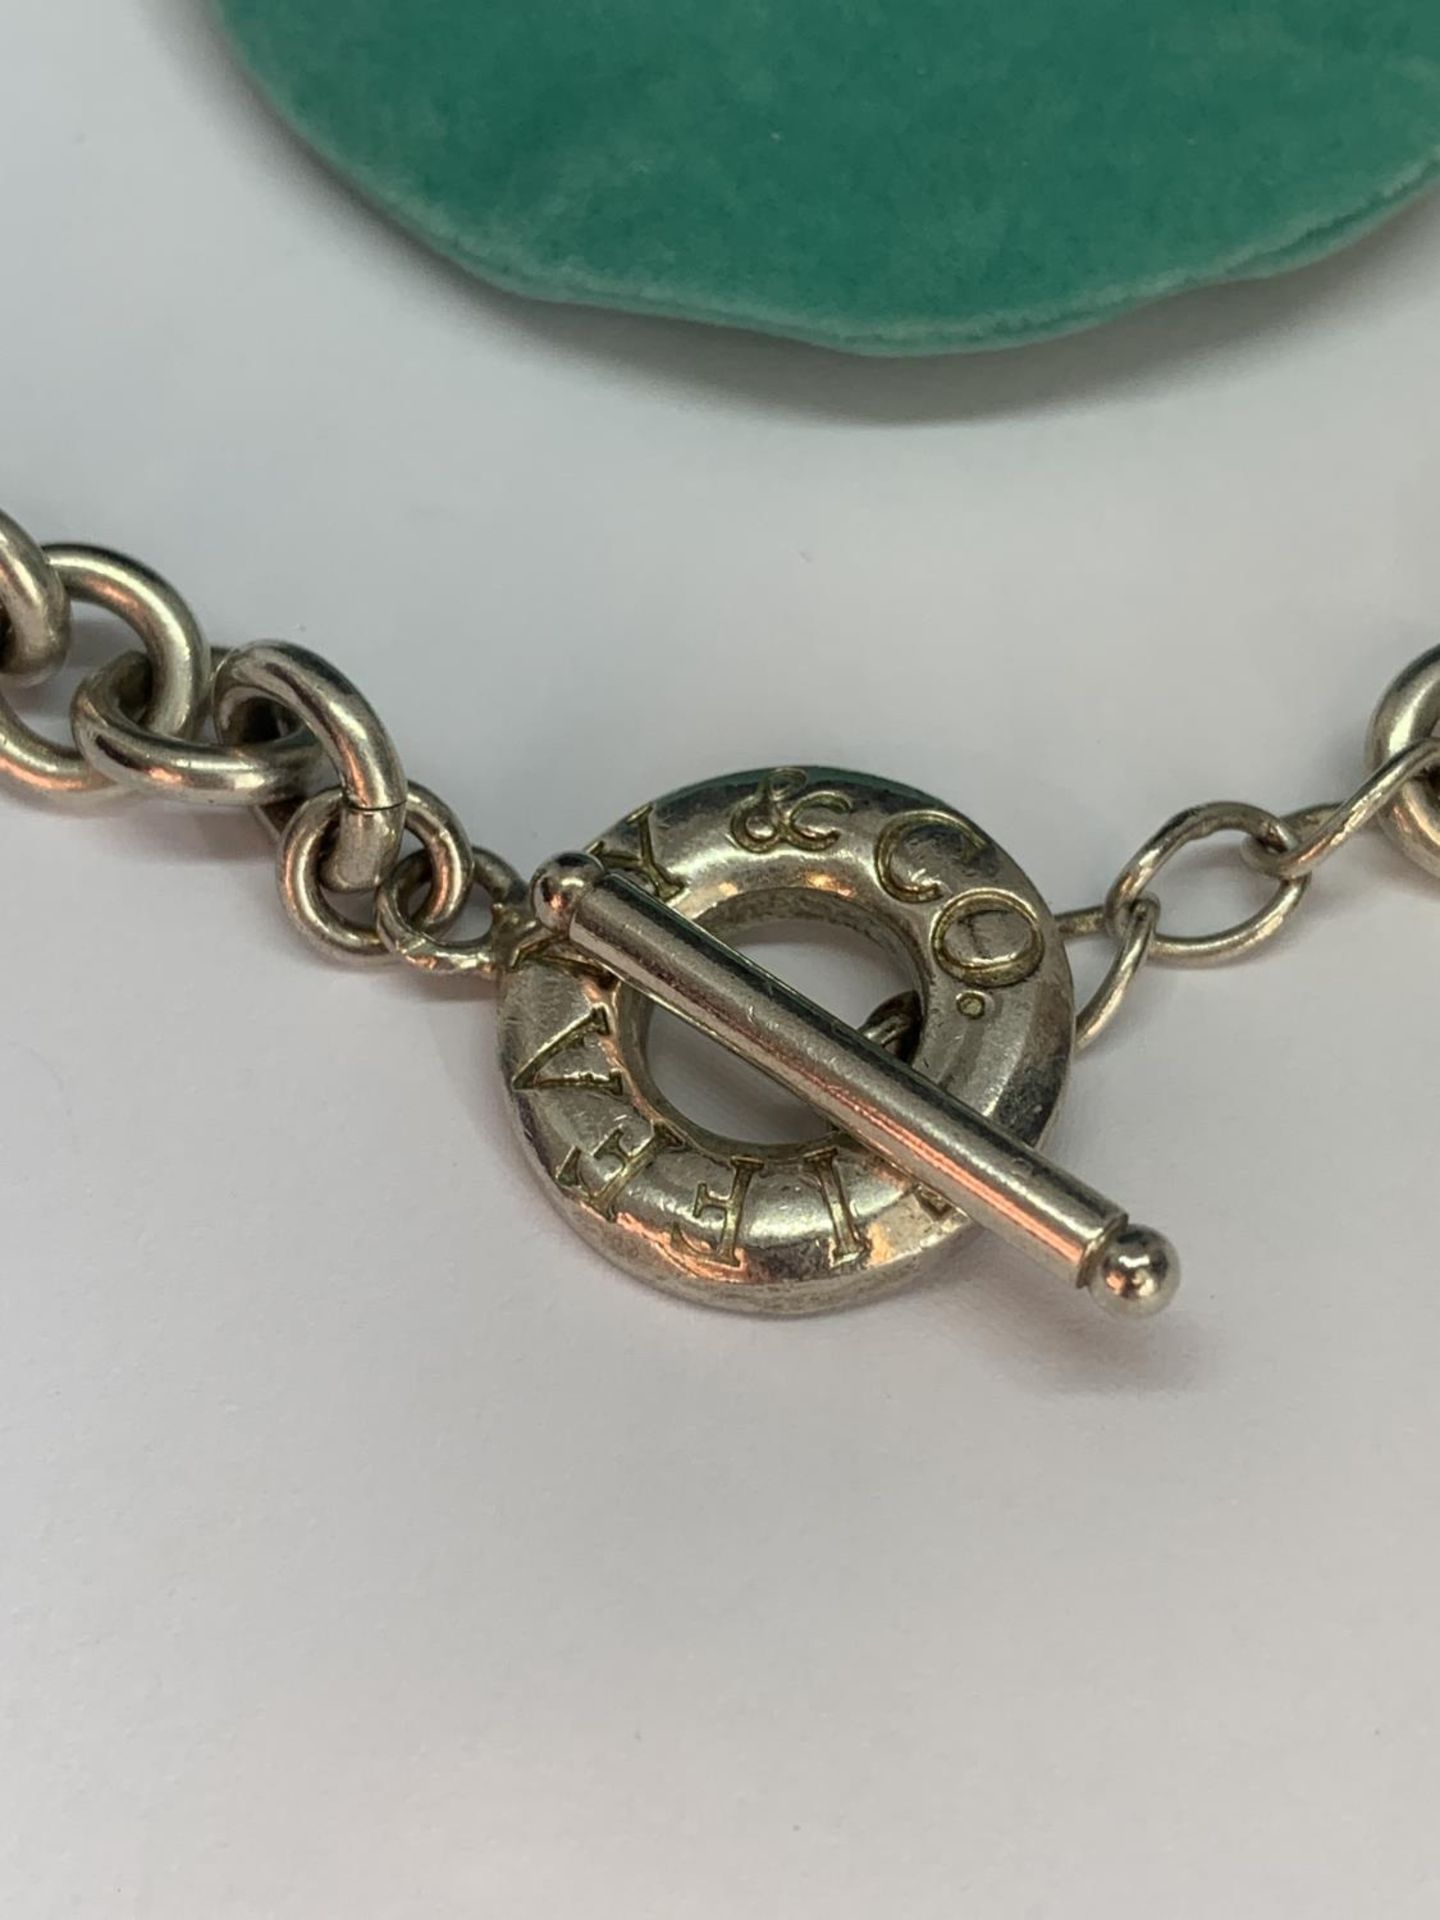 A TIFFANY NECKLACE CHAIN - Image 2 of 2